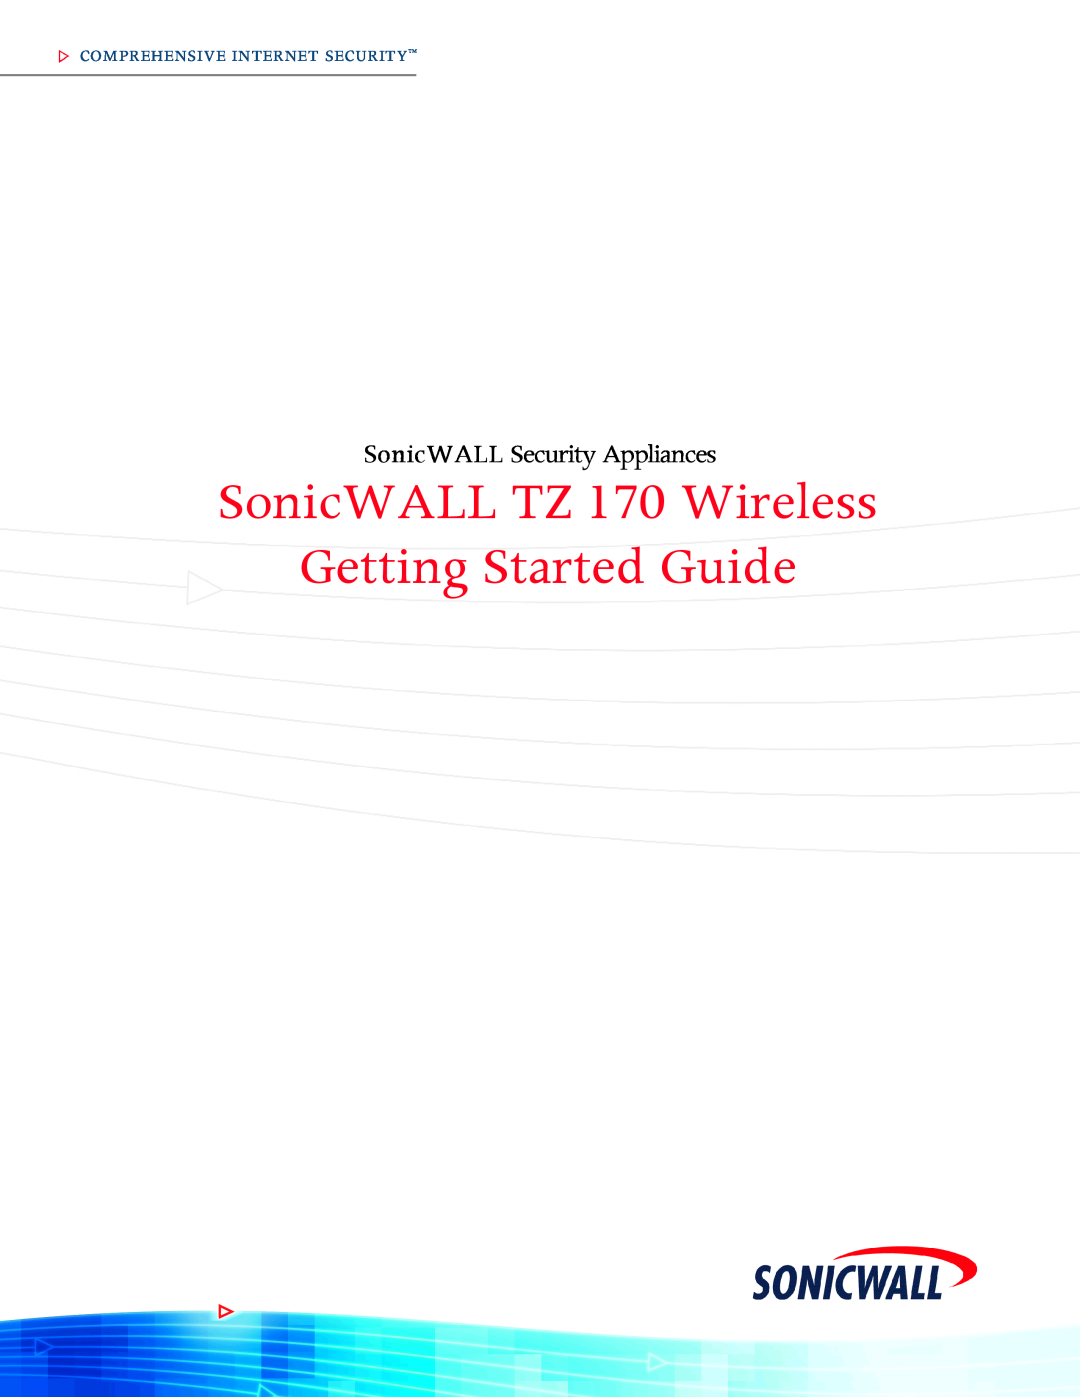 SonicWALL manual SonicWALL TZ 170 Wireless Getting Started Guide, SonicWALL Security Appliances 